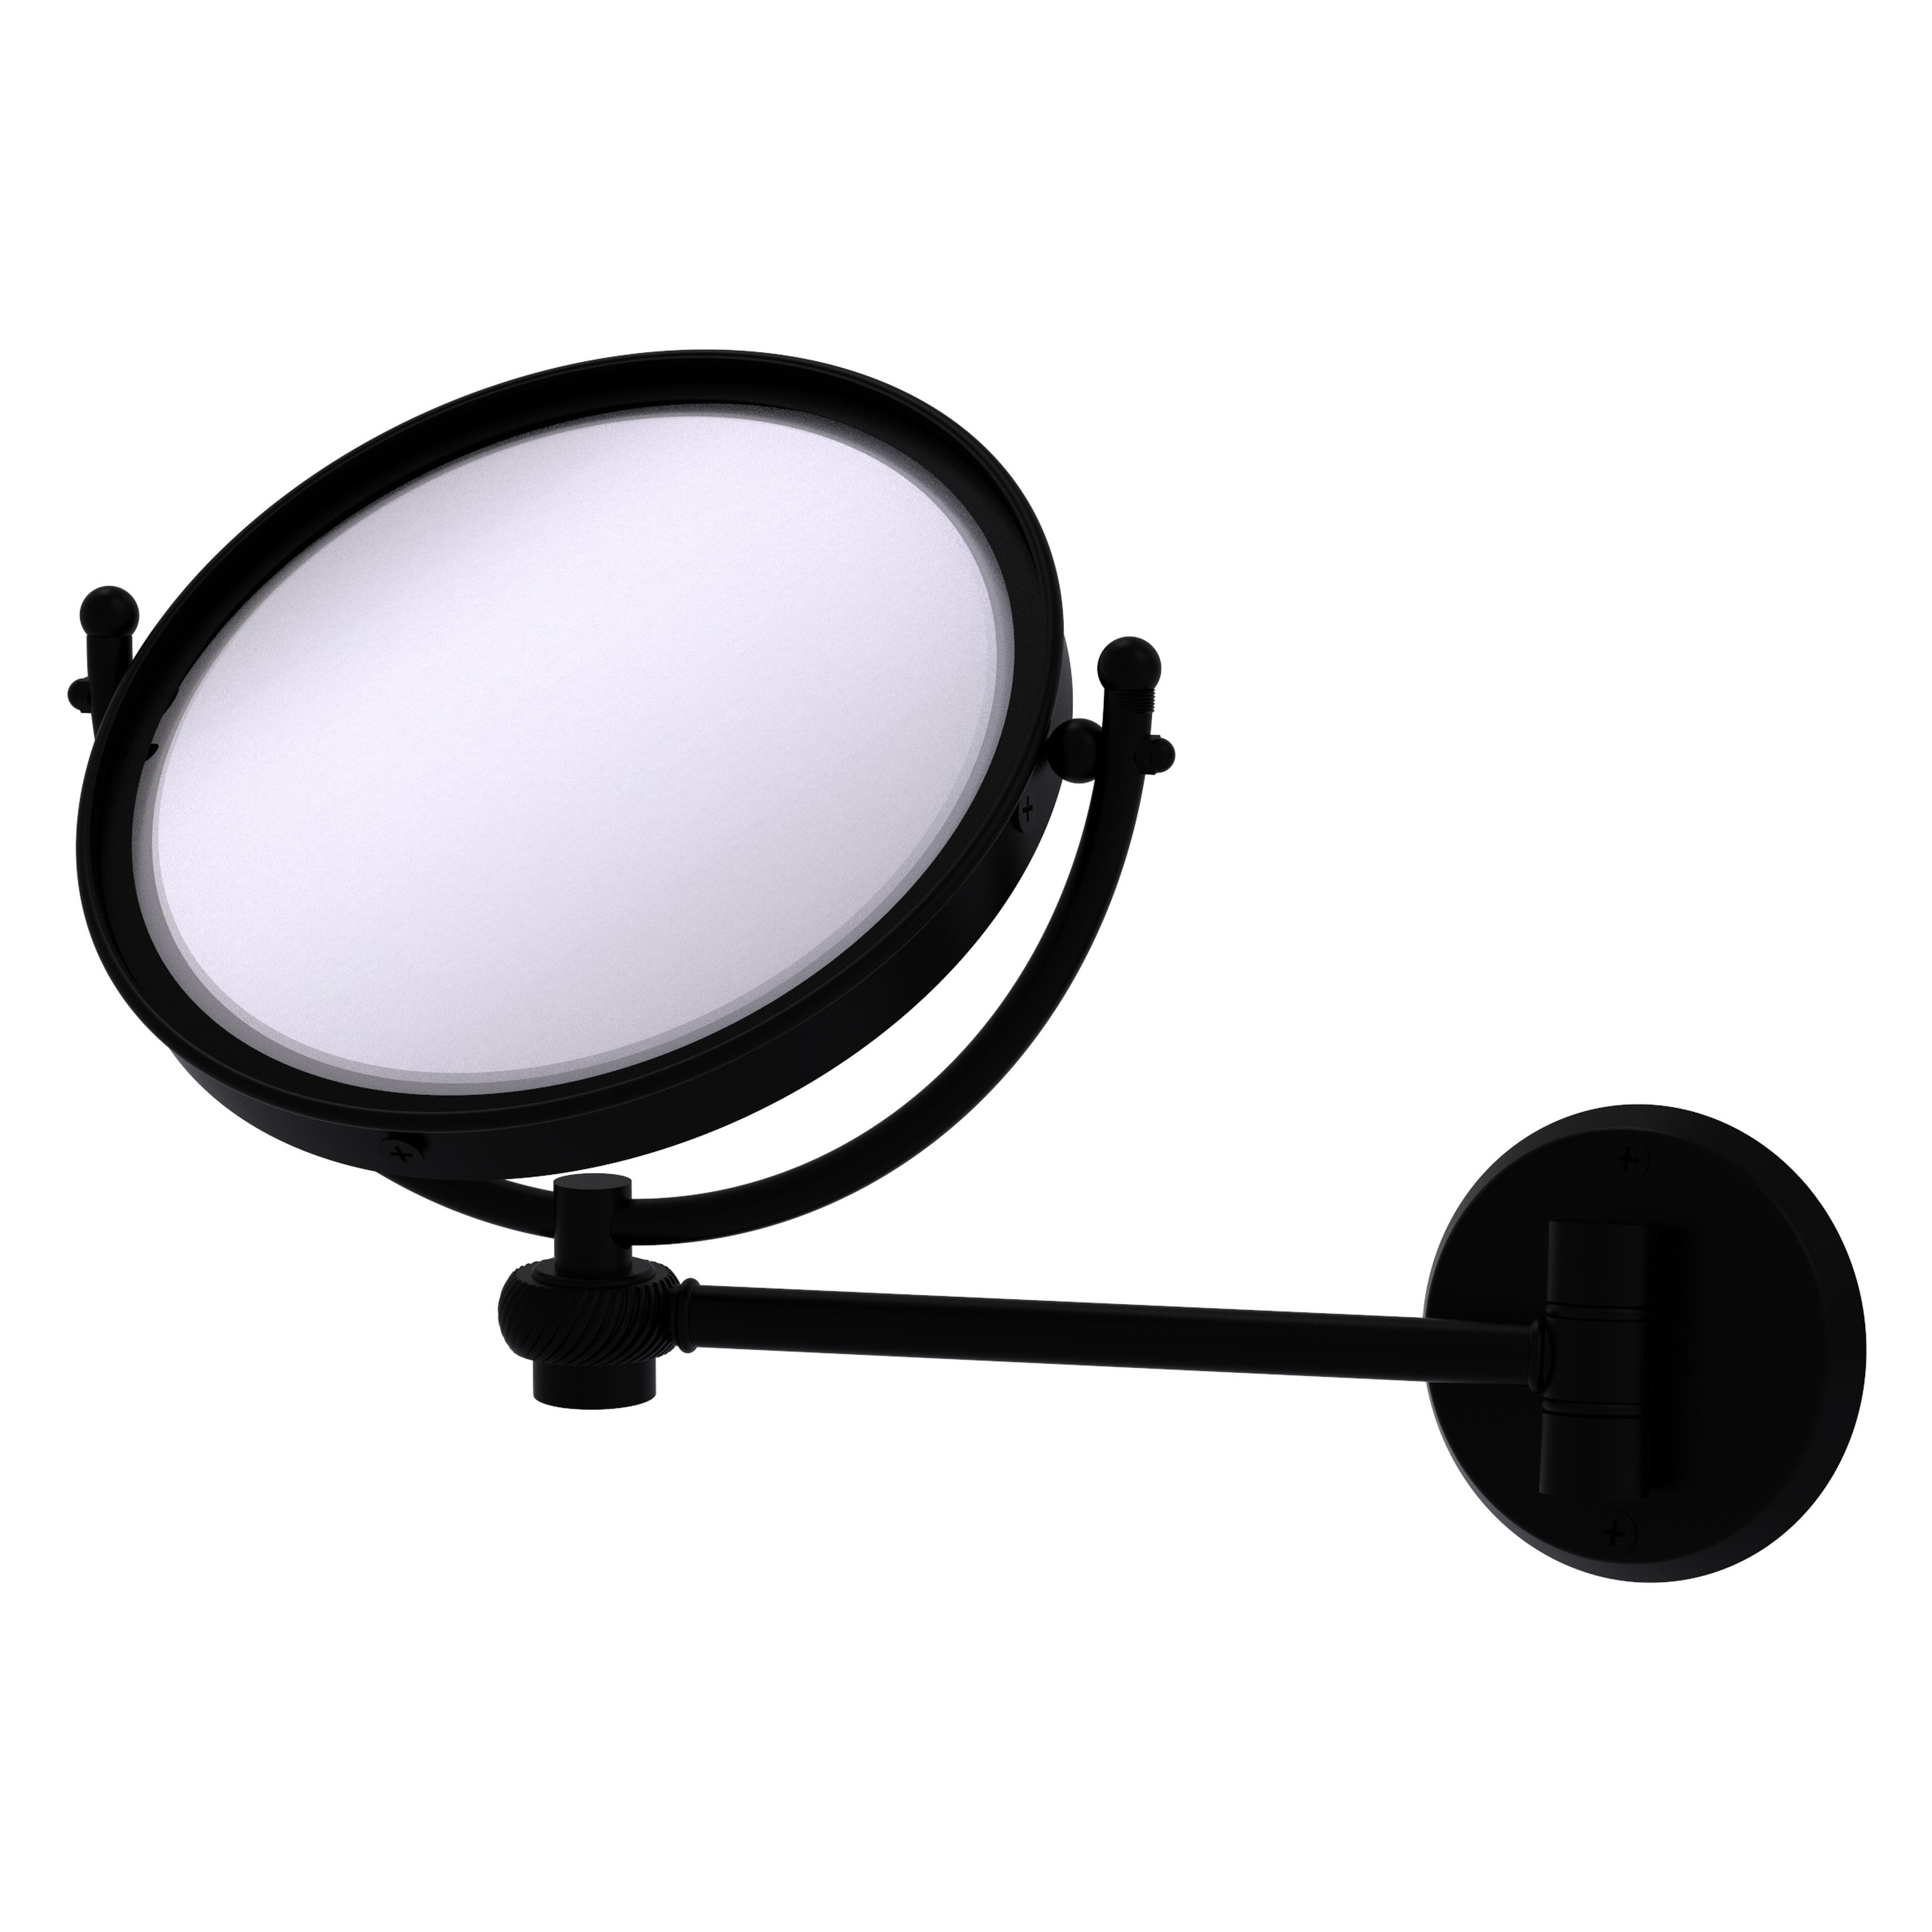 8-in x 10-in Matte Gray Double-sided 5X Magnifying Wall-mounted Vanity Mirror | - Allied Brass WM-5T/5X-BKM